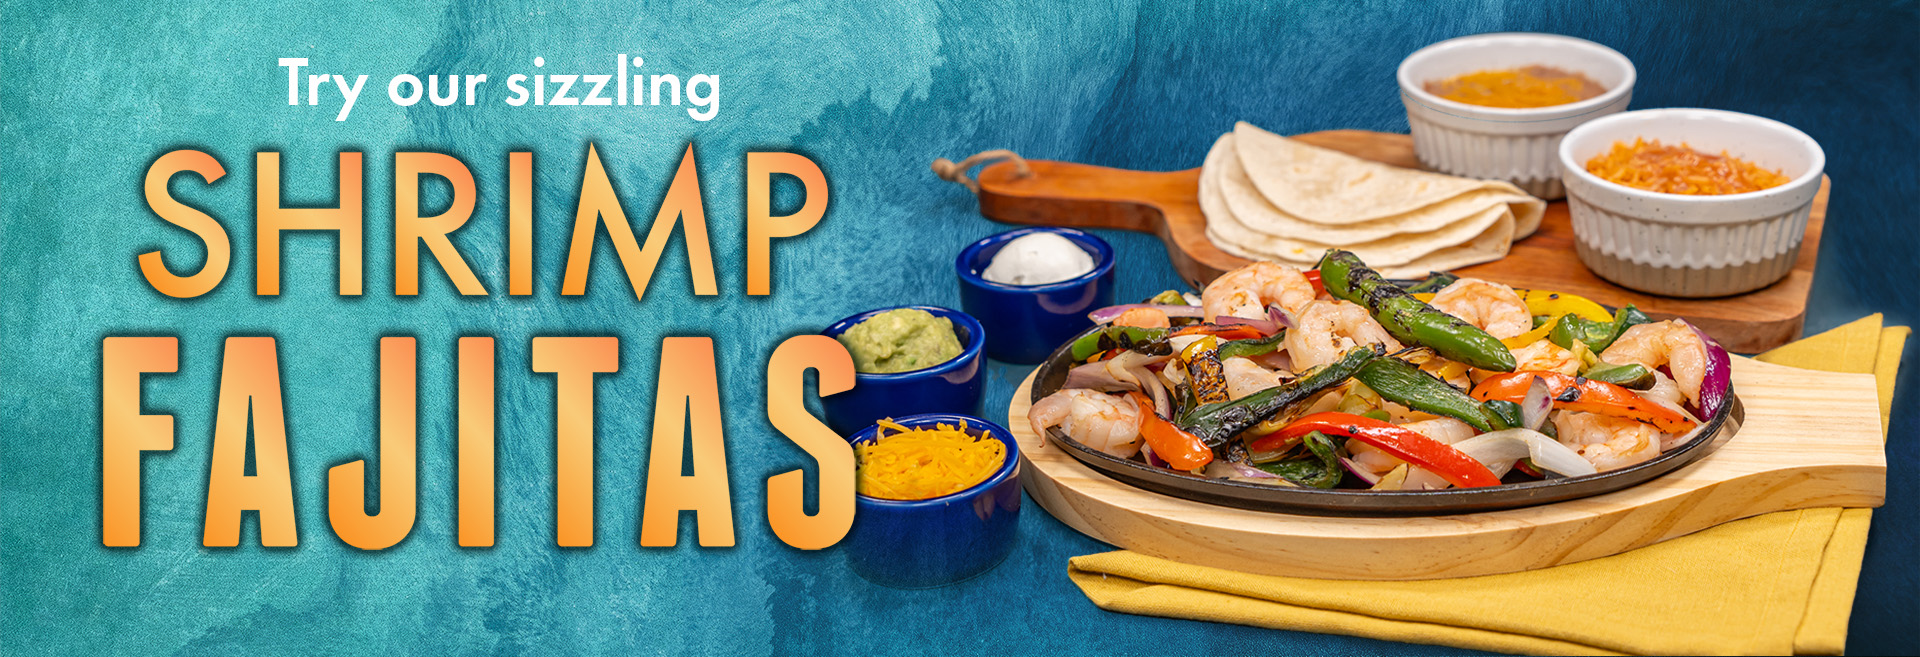 The image displays a vibrant and colorful serving of shrimp fajitas with the inviting text "Try our sizzling SHRIMP FAJITAS" placed above. The fajitas are presented on a skillet with shrimp and assorted grilled vegetables. Accompanying the main dish are sides of shredded cheese, sour cream, guacamole, and rice, with tortillas on the side, all laid out on a wooden board over a blue textured background. The image is likely intended for use as an advertisement or menu promotion.